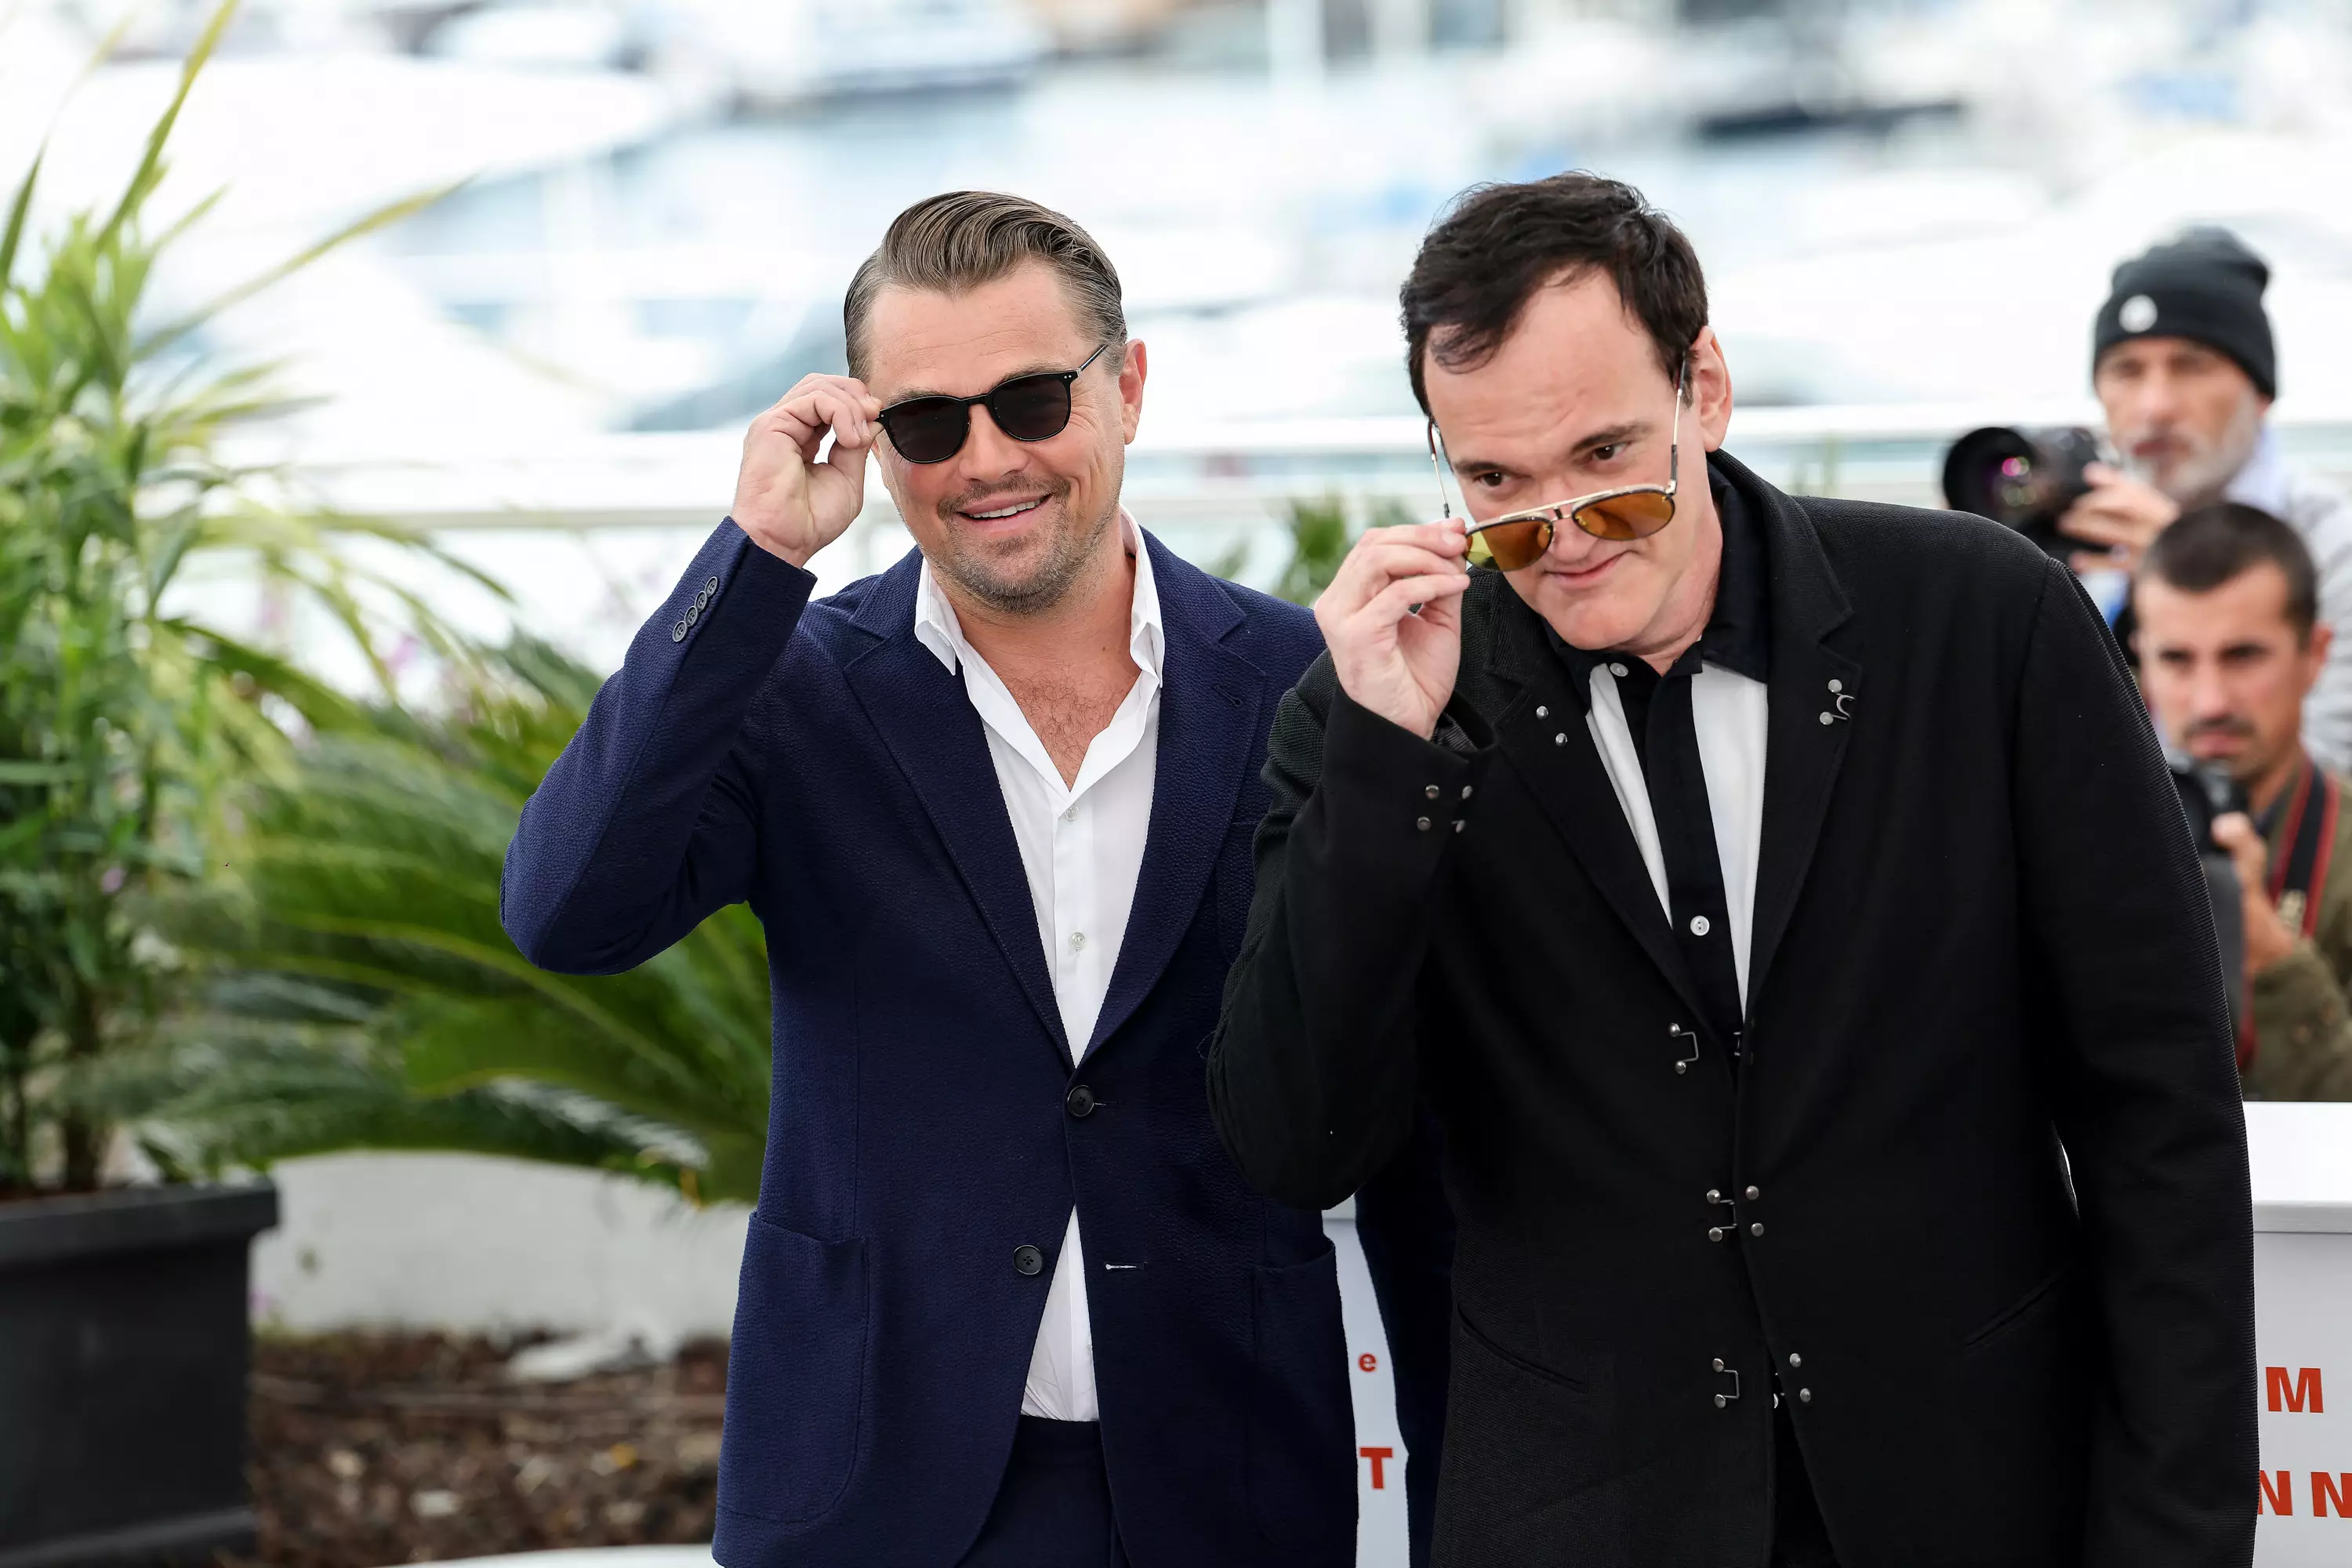 Tarantino said DiCaprio 'stands alone' in the industry.